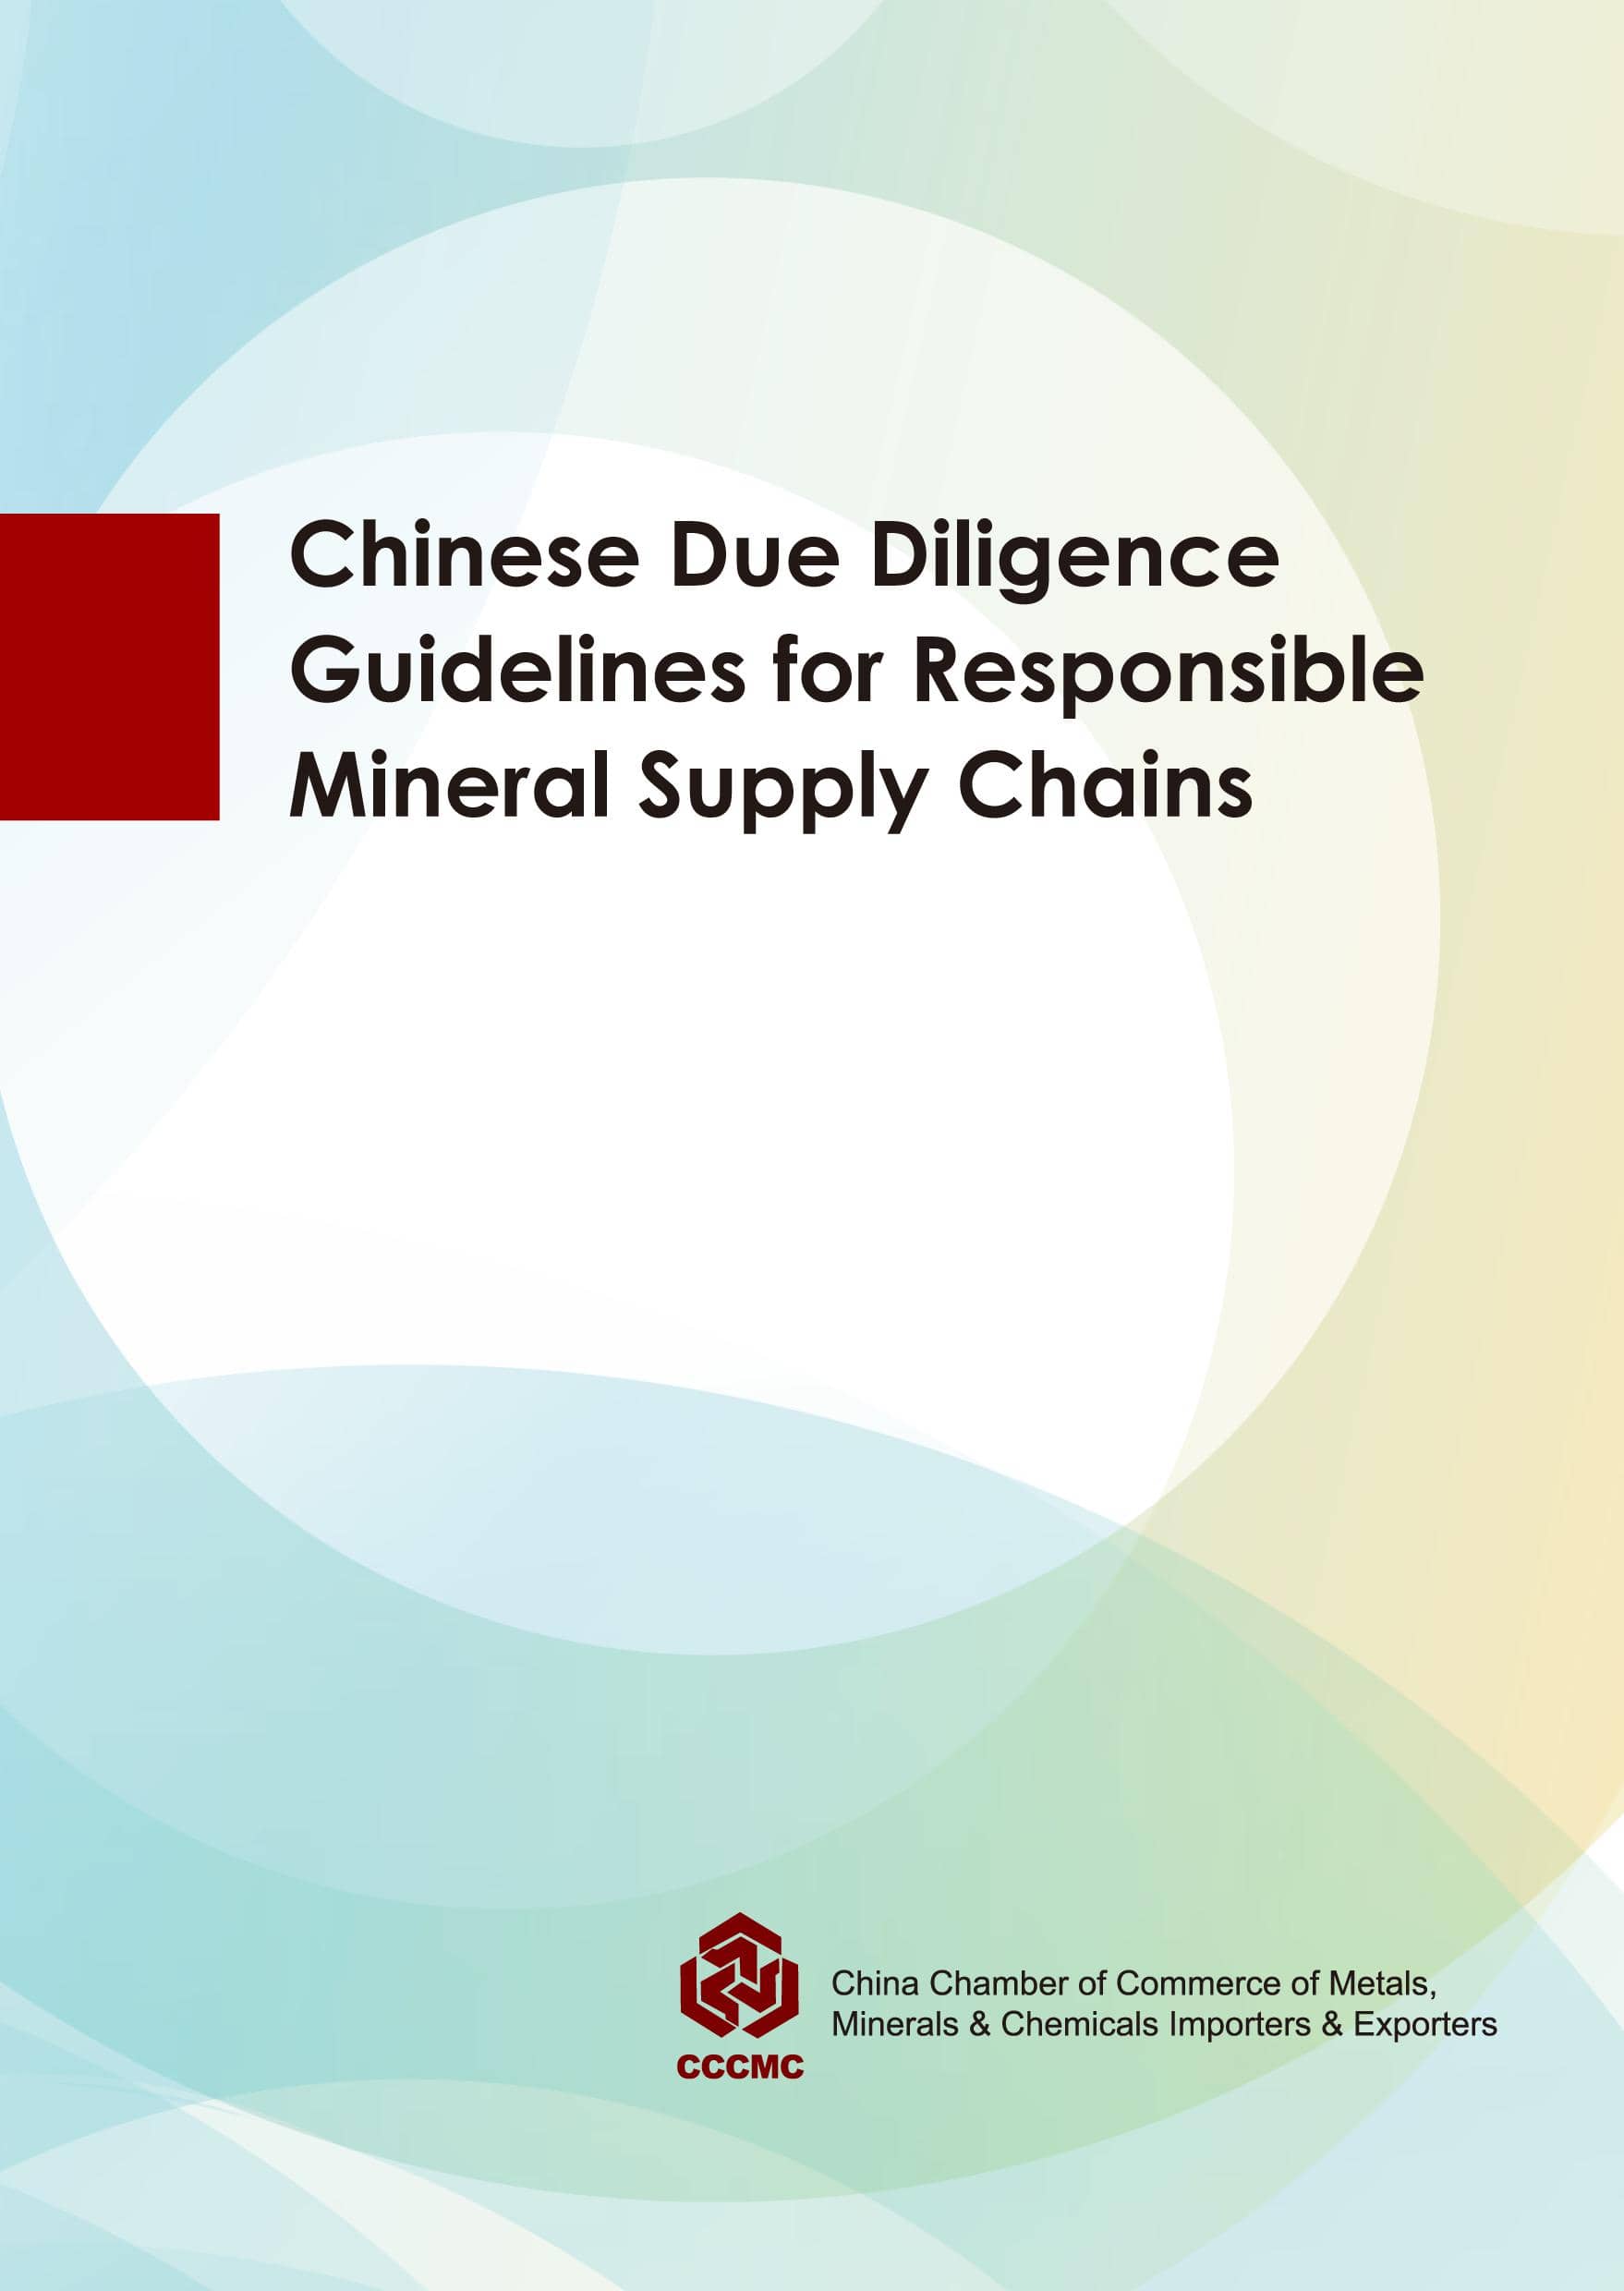 Chinese Due Diligence Guidelines for Responsible Mineral Supply Chains (CCCMC)